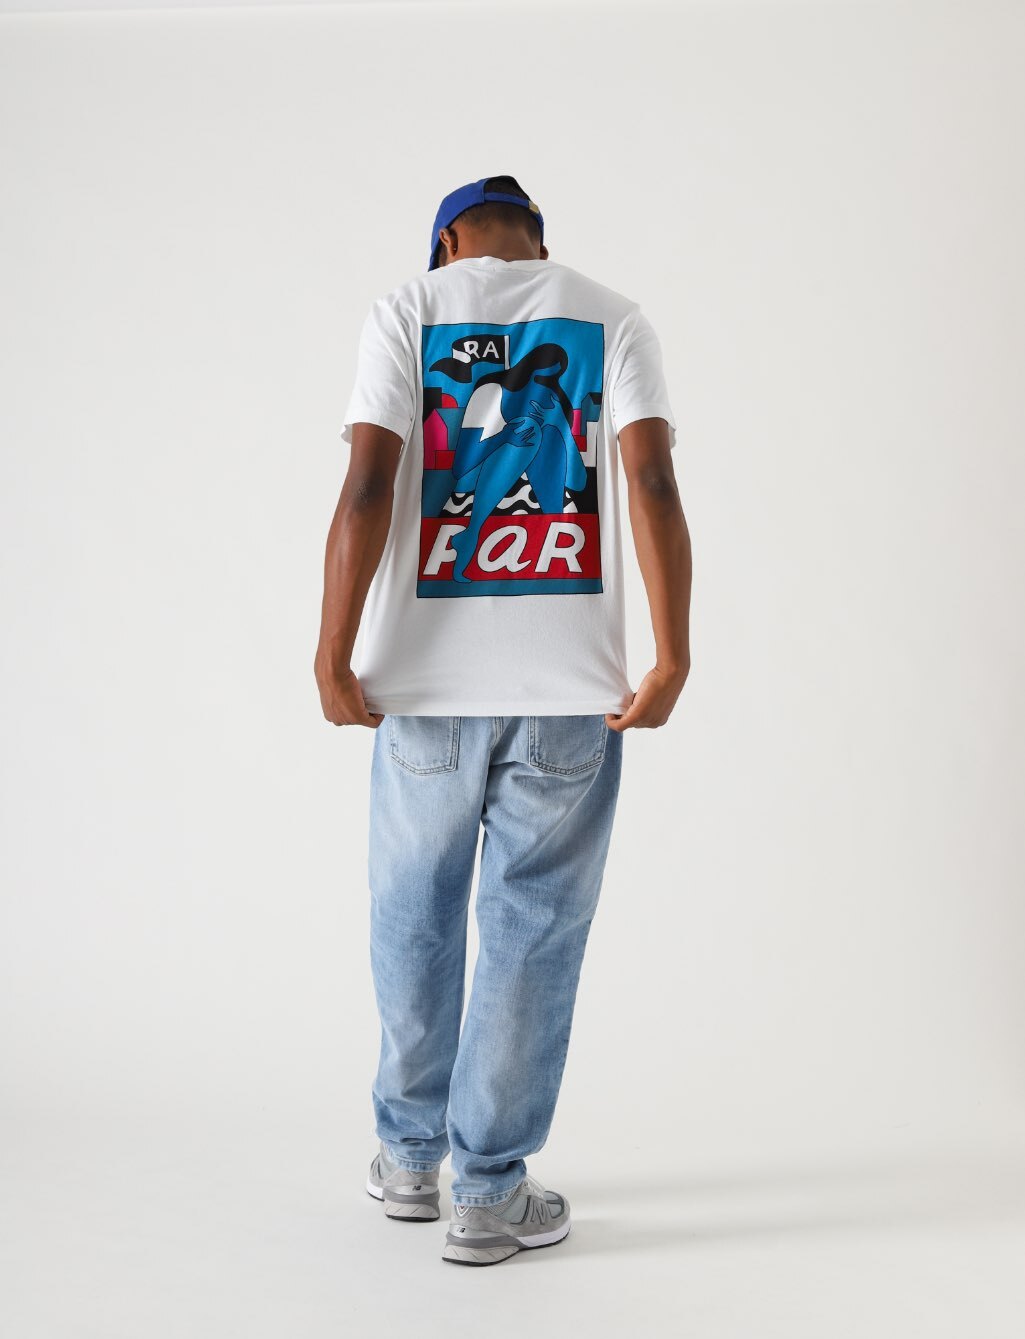 by Parra new collection picture 8